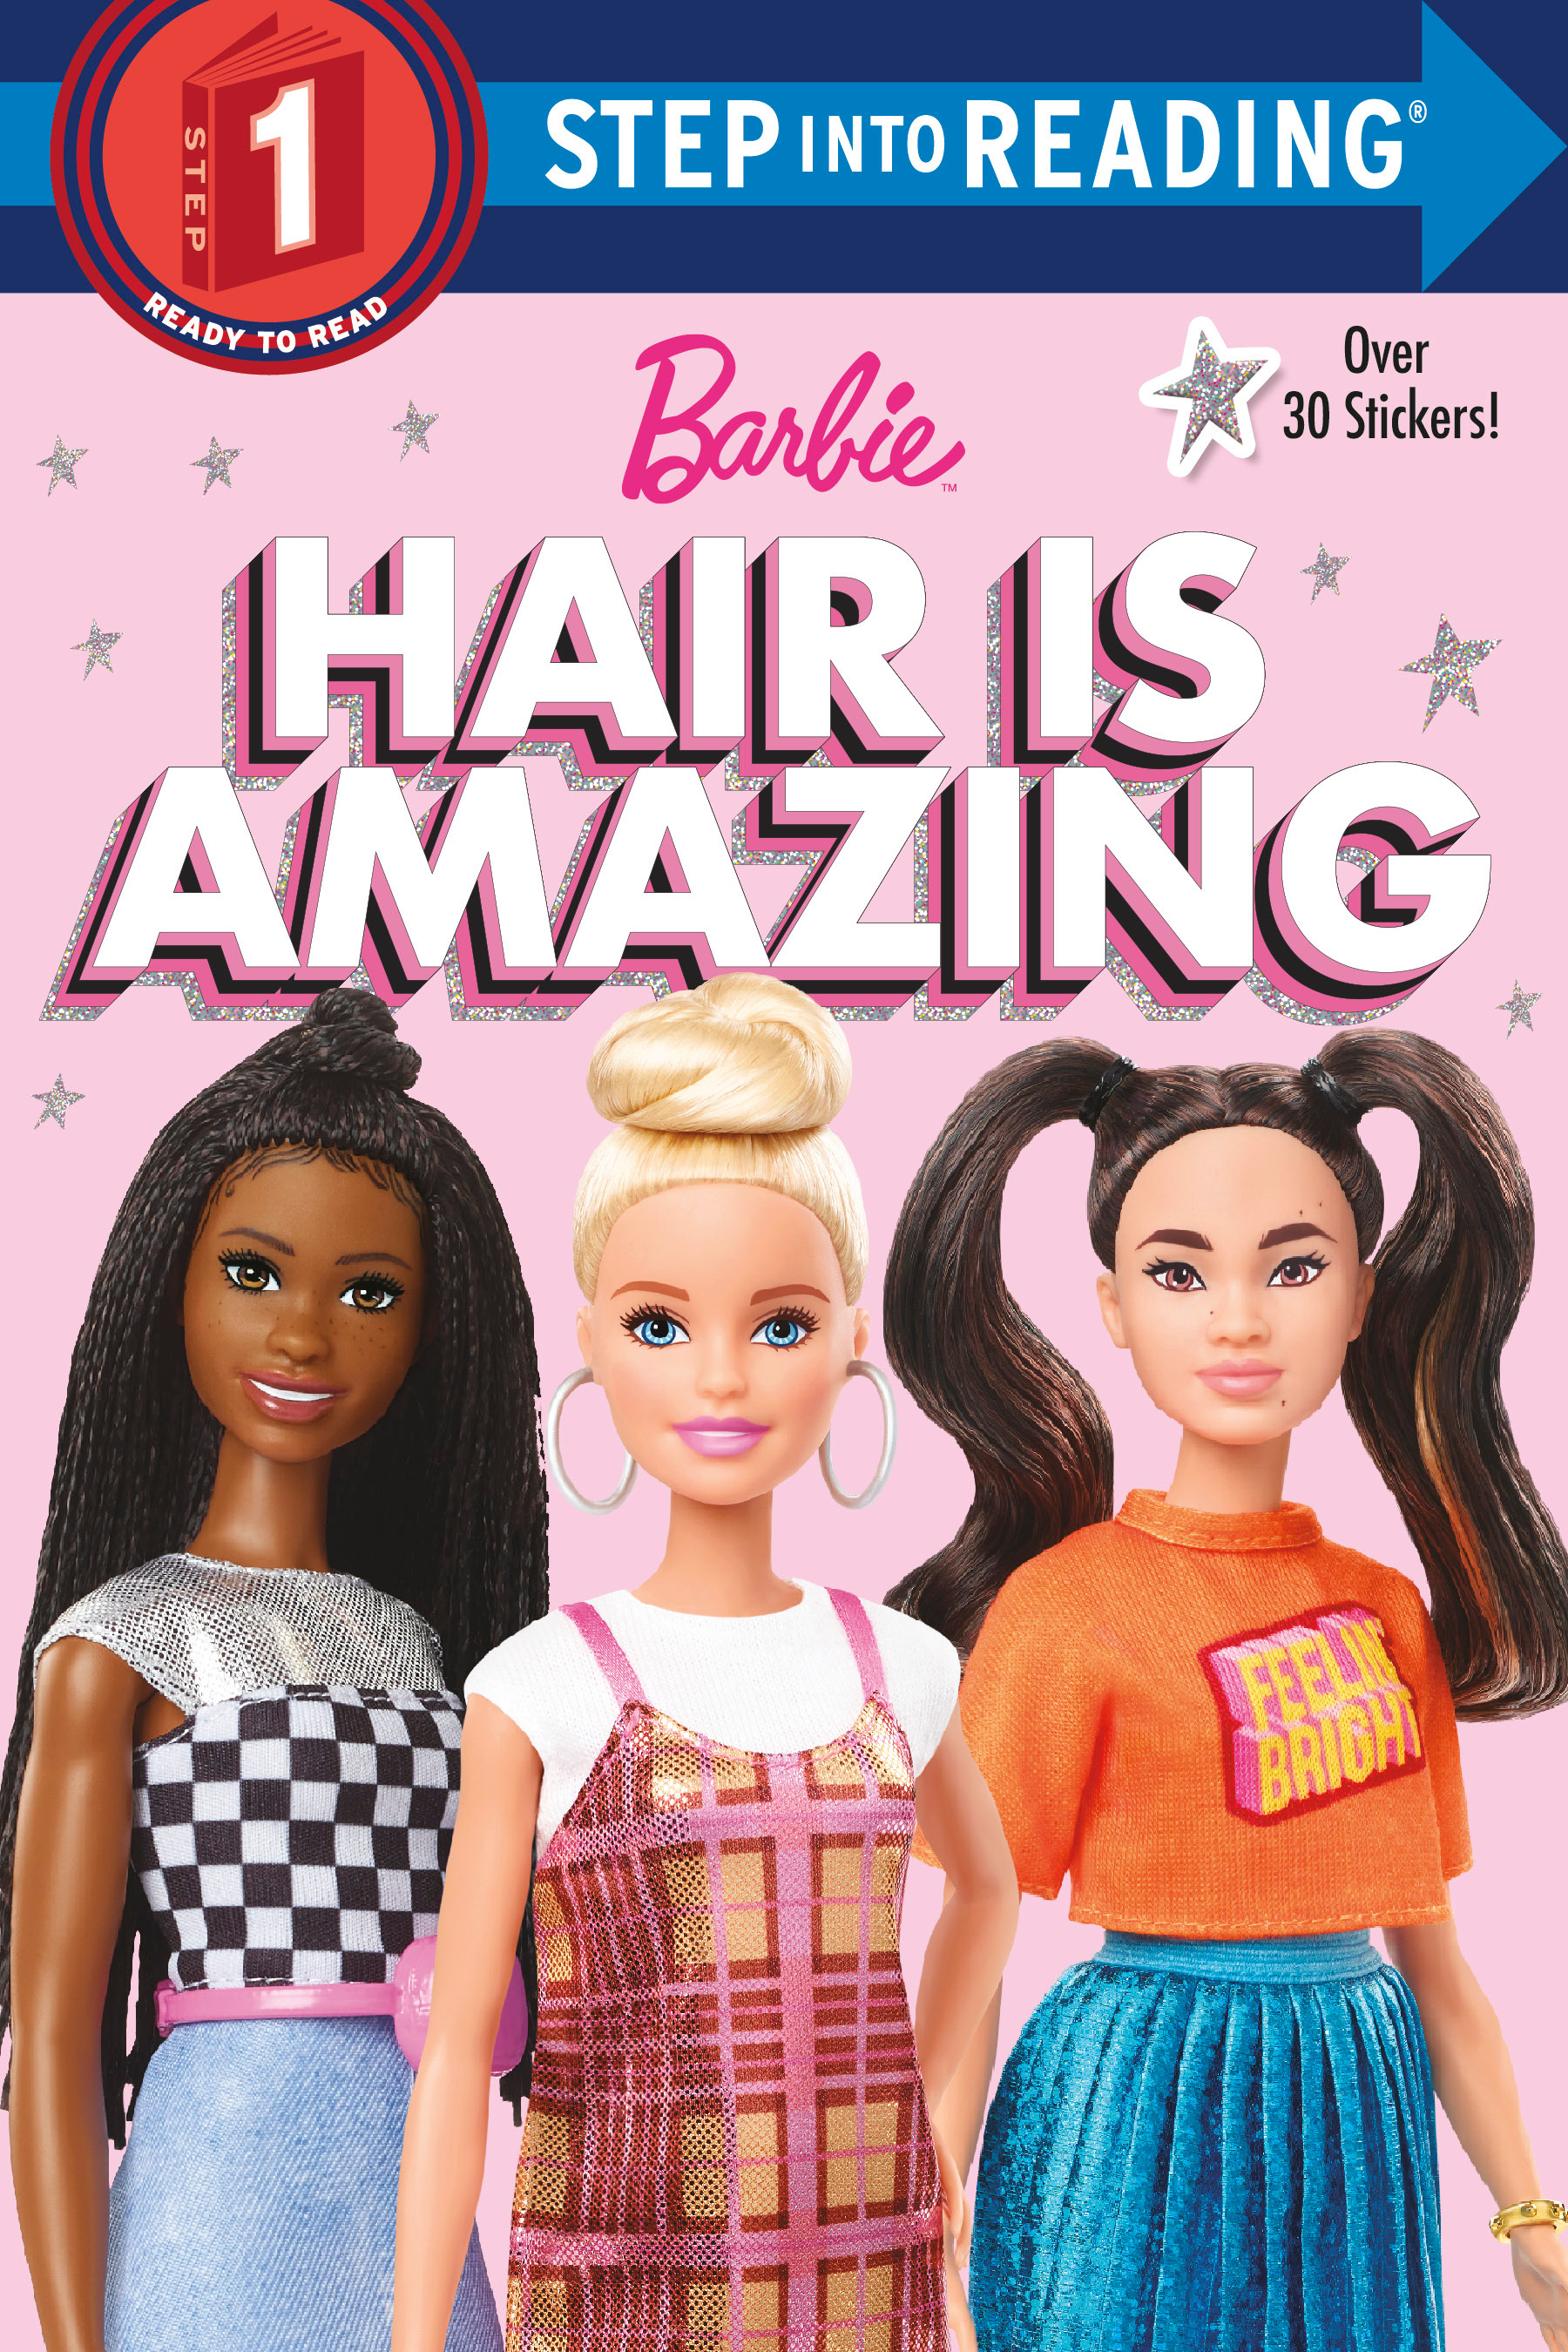 Step Into Reading - Hair is Amazing (Barbie) : A Book About Diversity | First reader